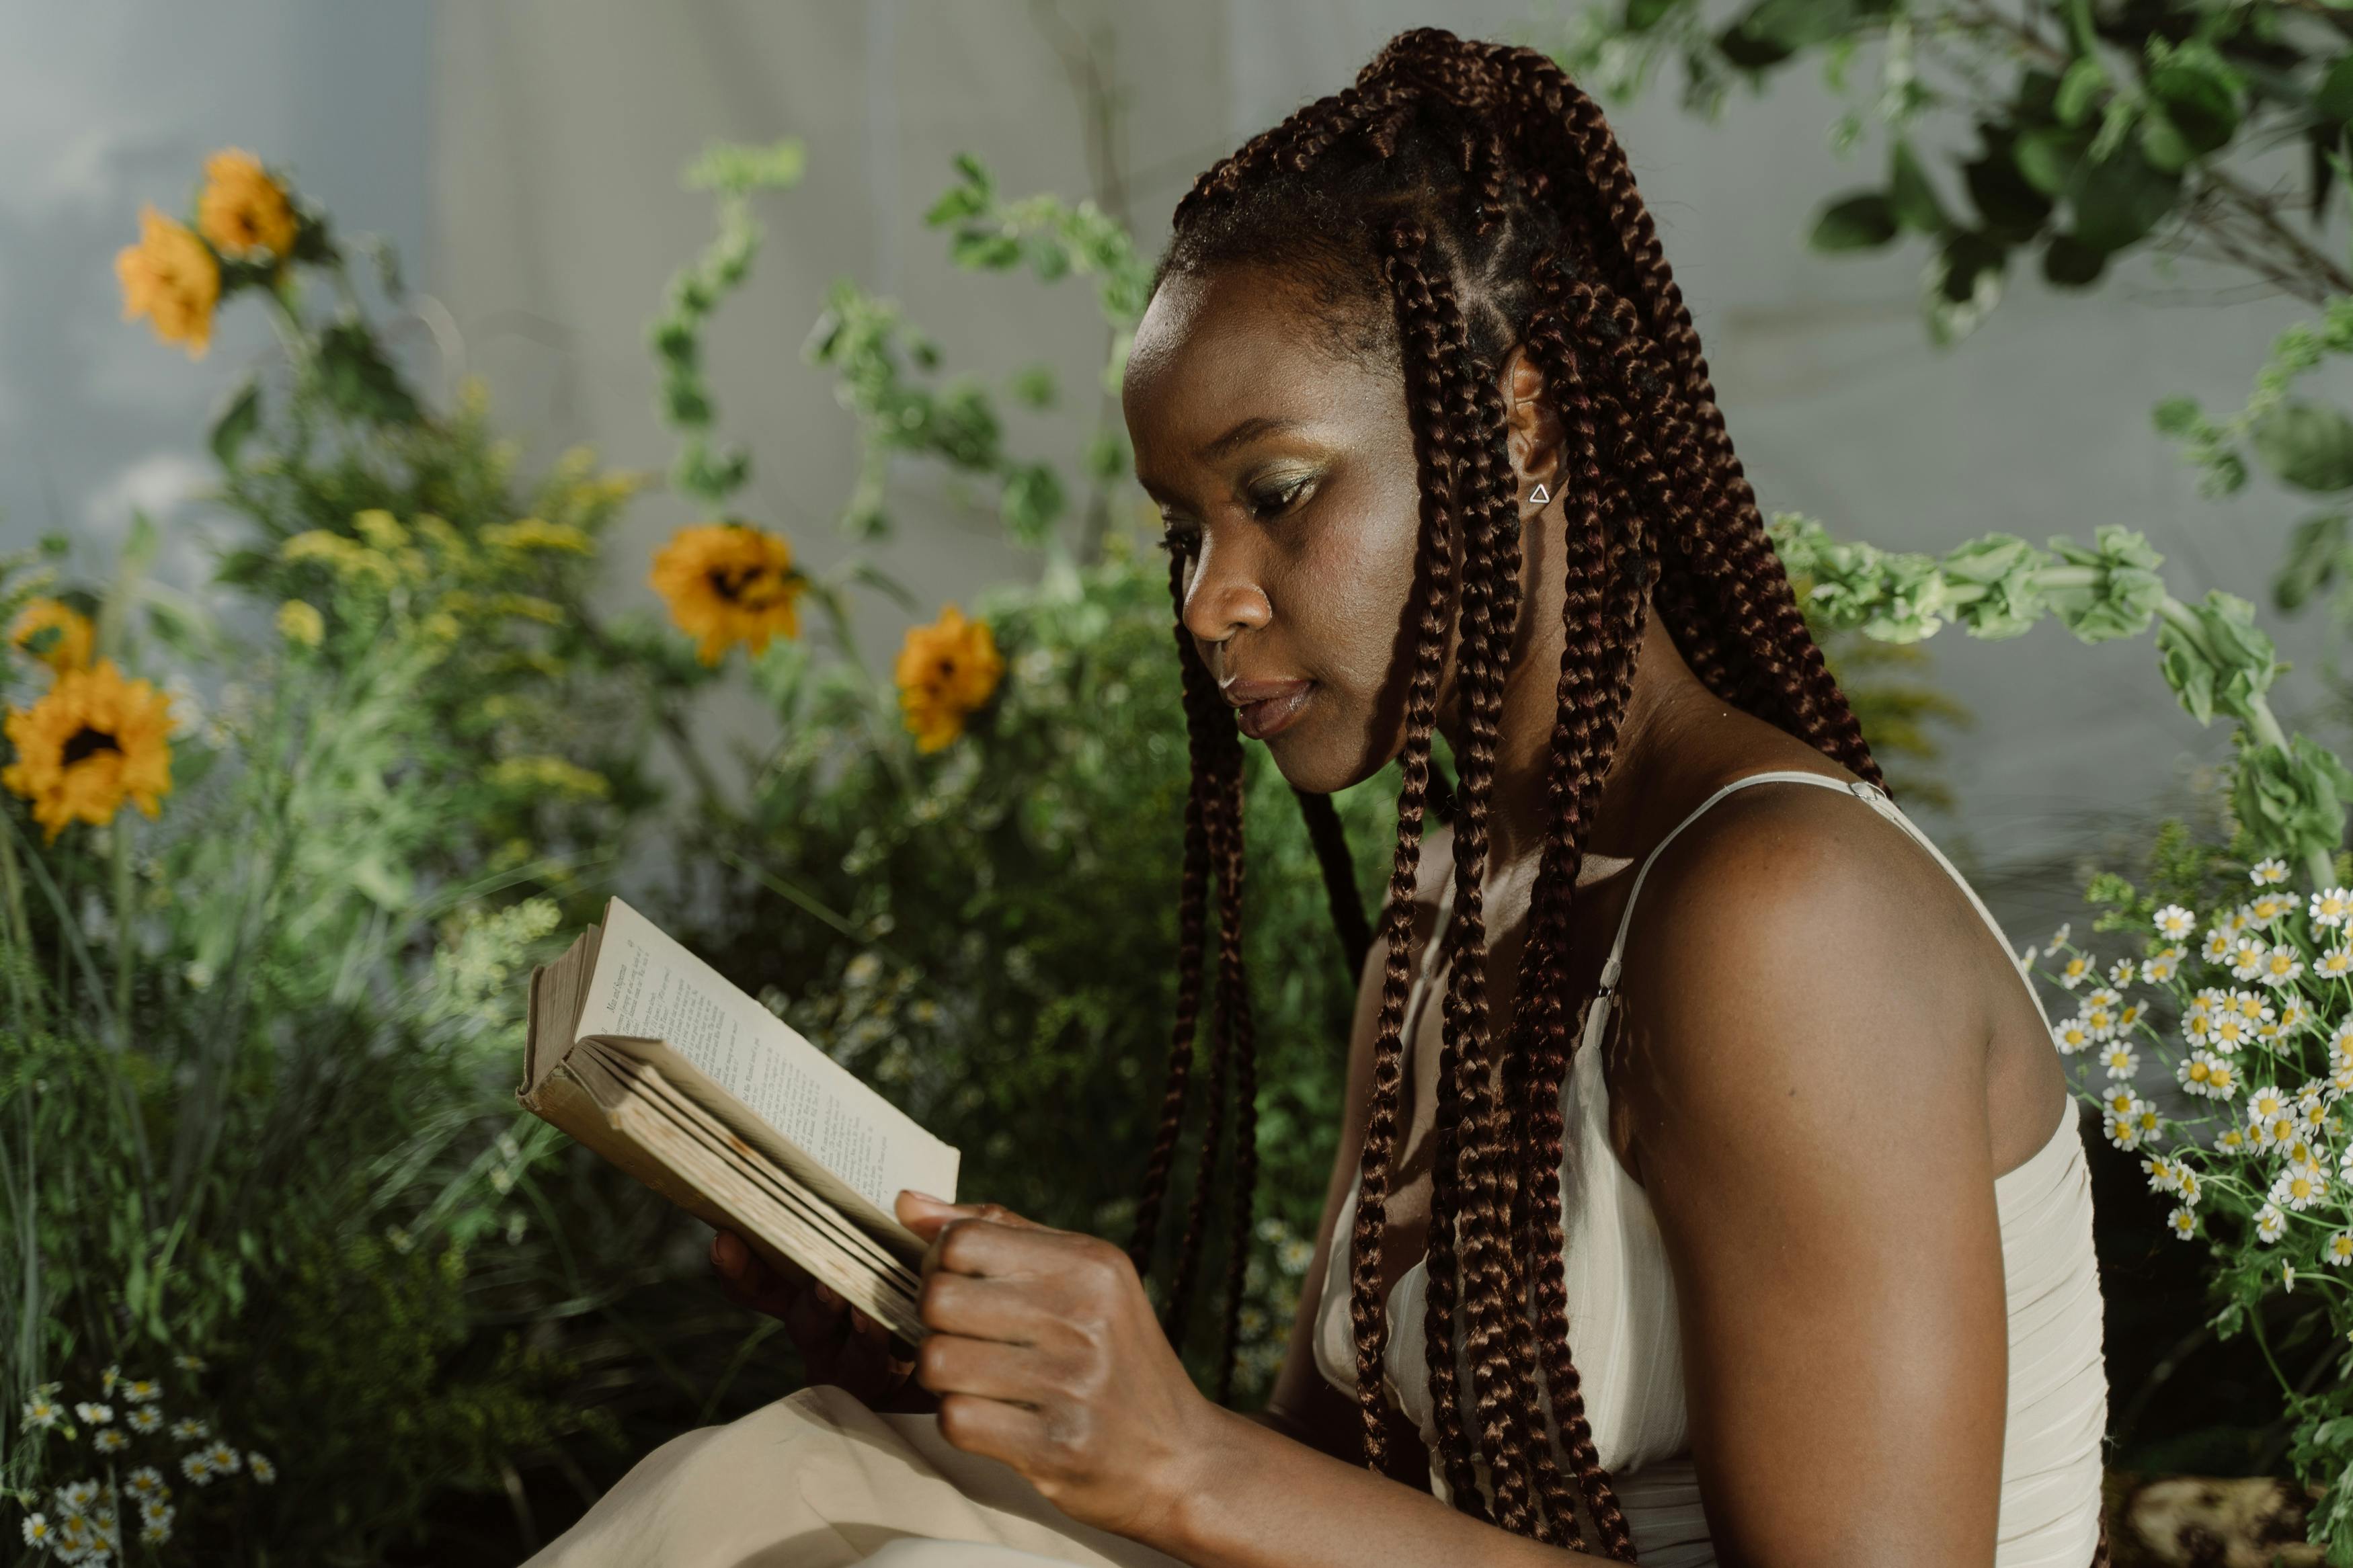 A young woman with braided hair reading a book